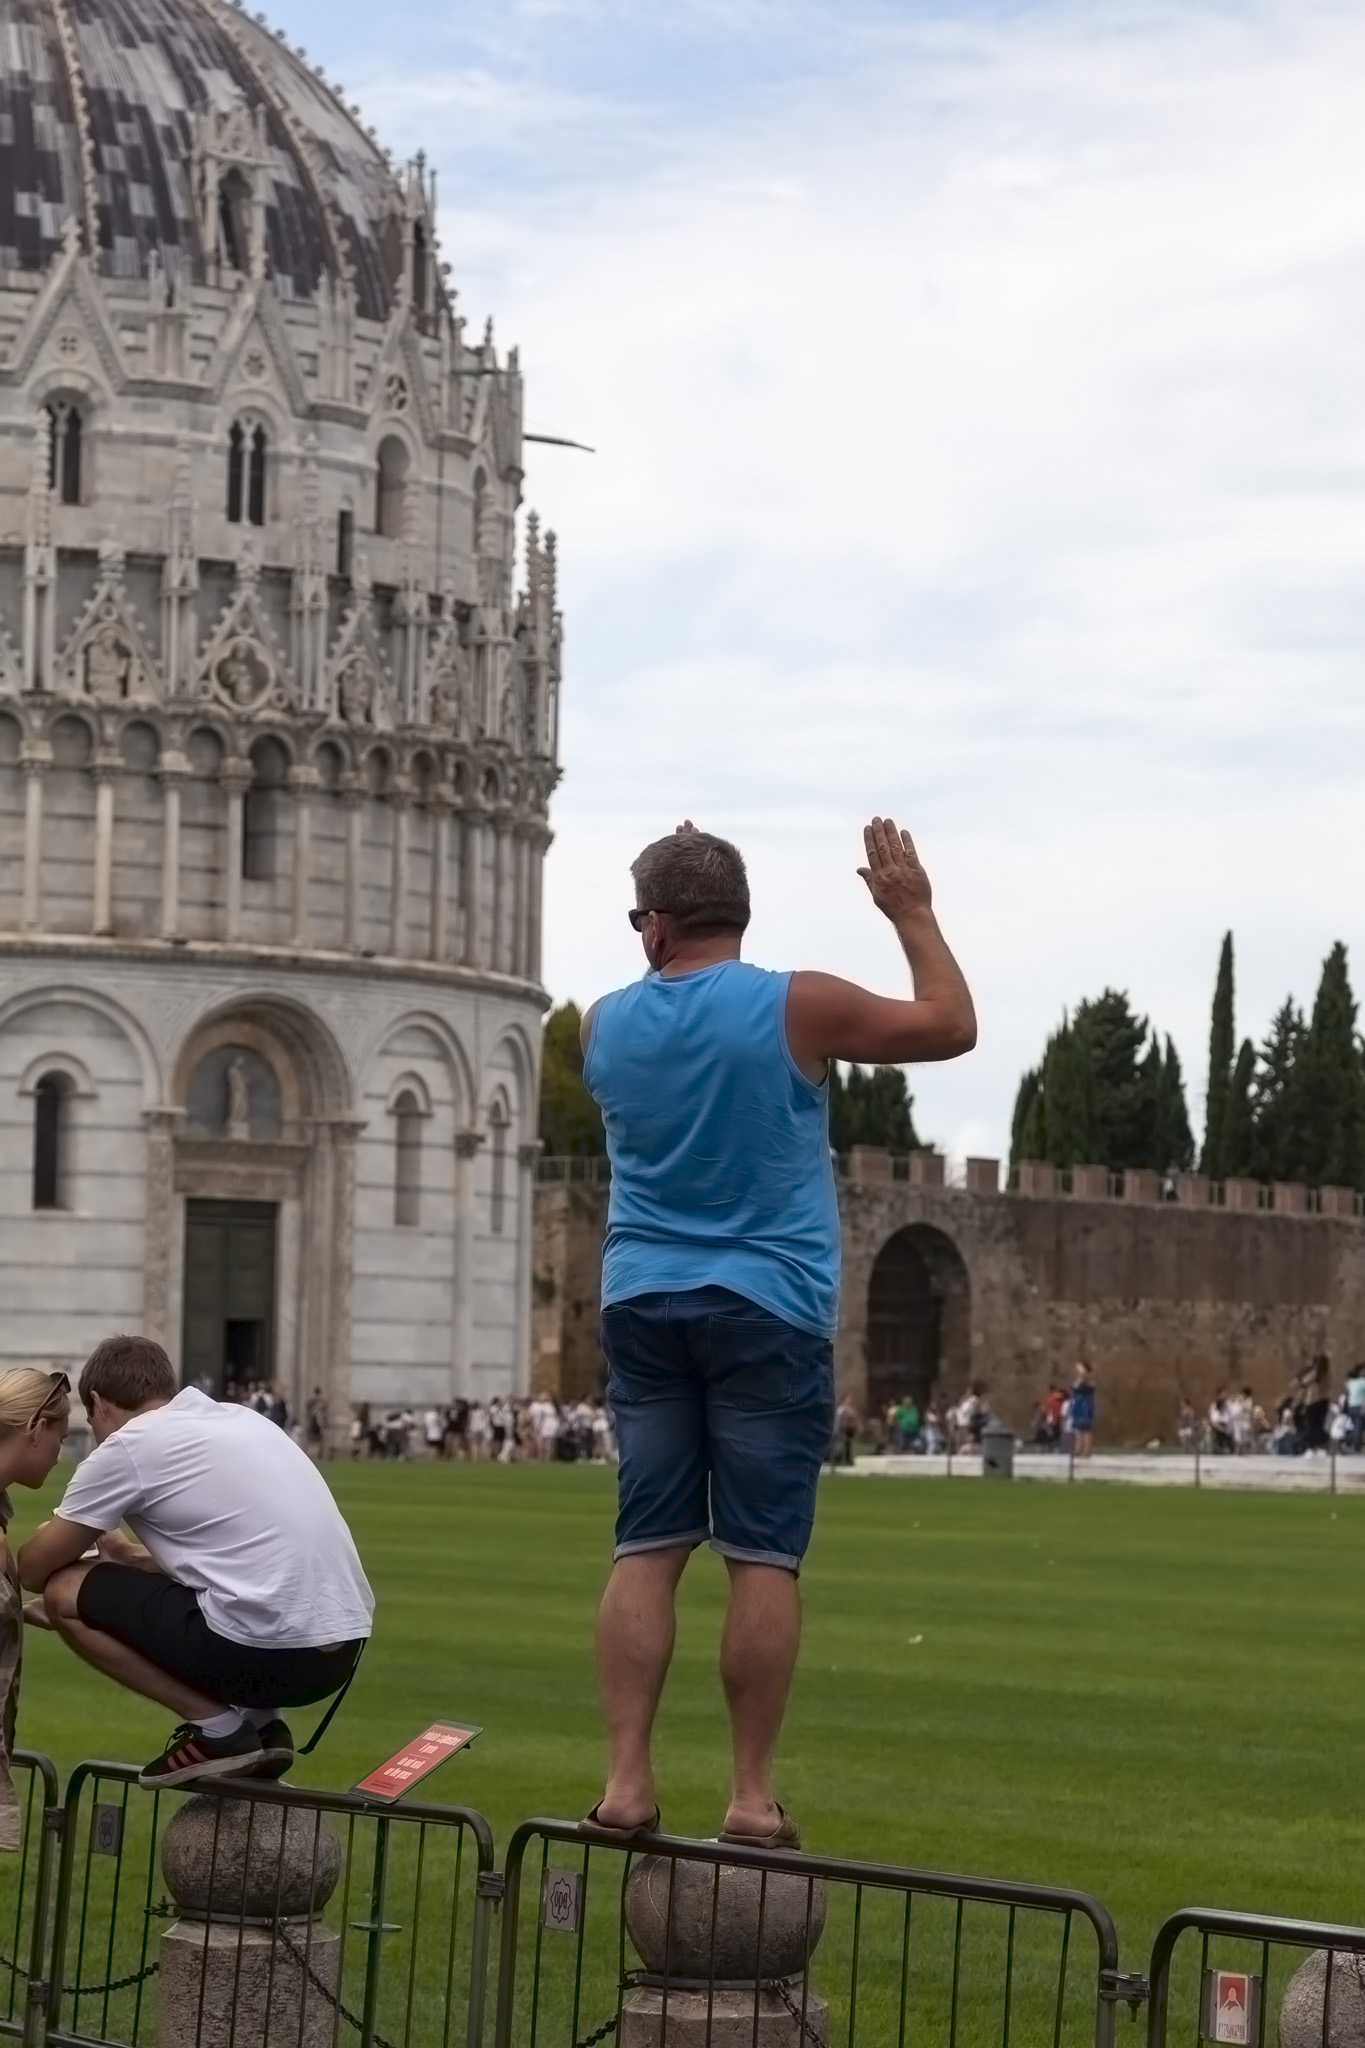 We Love Pisa. The 12 Most Awesome Pictures Of Tourists Posing At The Leaning  Tower Of Pisa – BoredBug | In viaggio, Foto, Italia